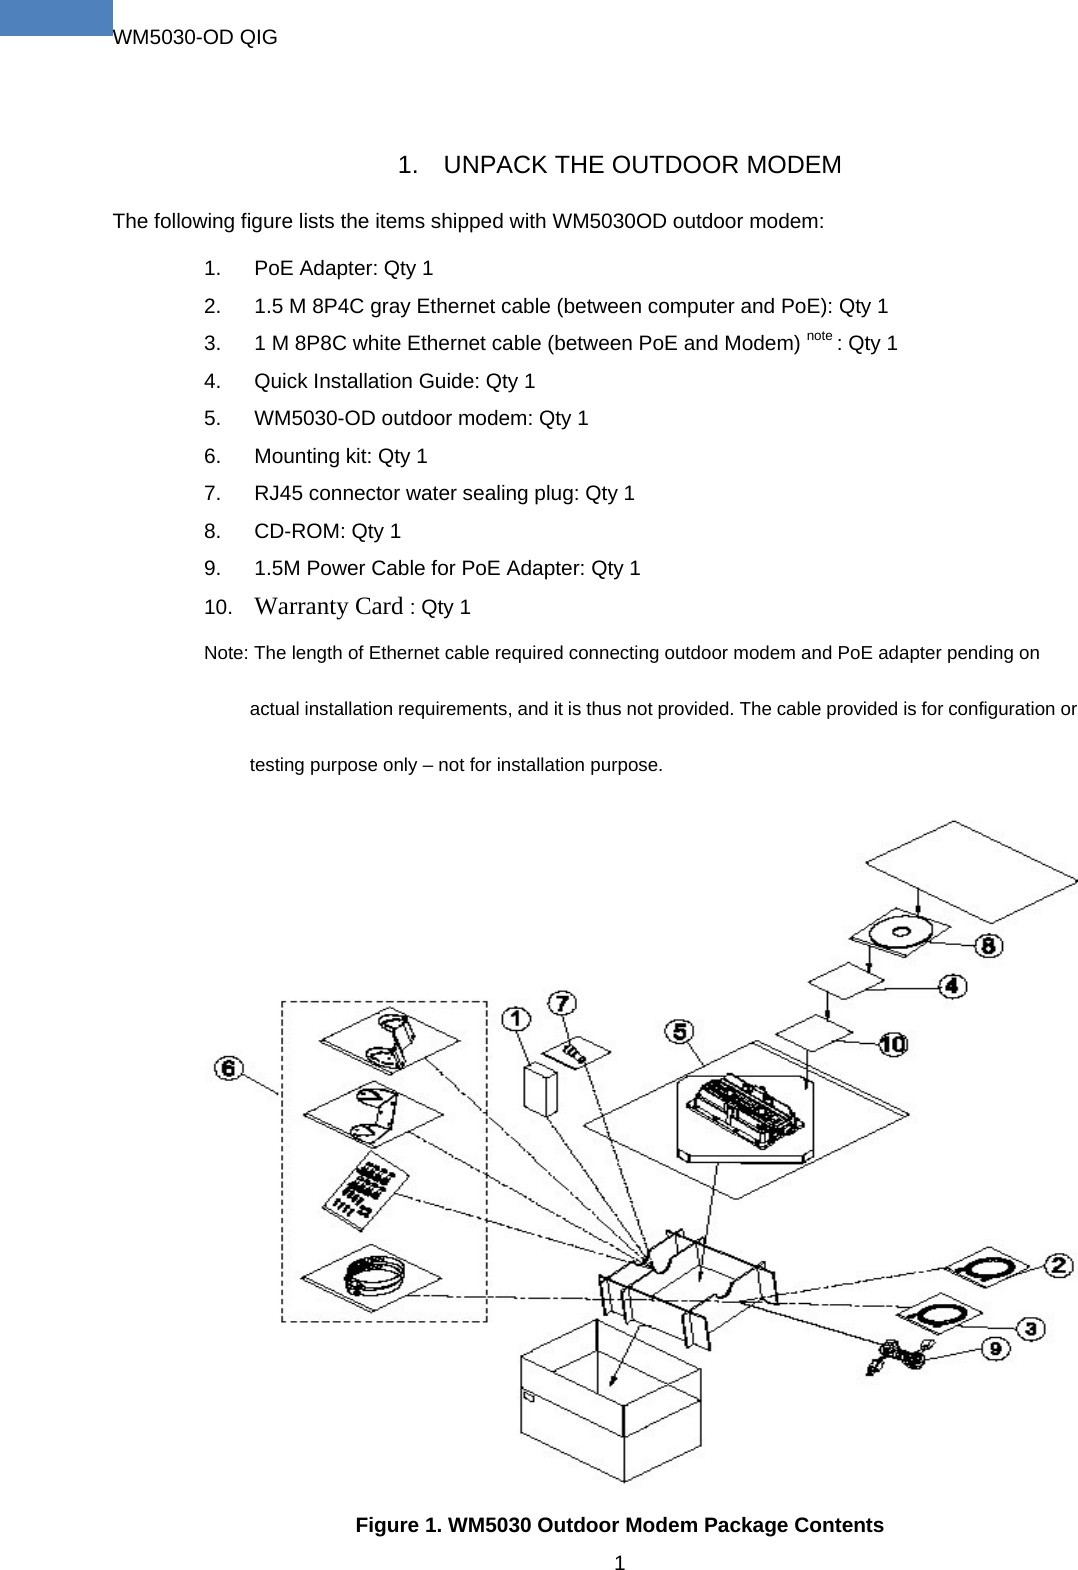 Ethernet Cable Wiring Diagram Unique Wm5030od Wimax Outdoor Modem Wiring Diagram for A Cat5 Cable